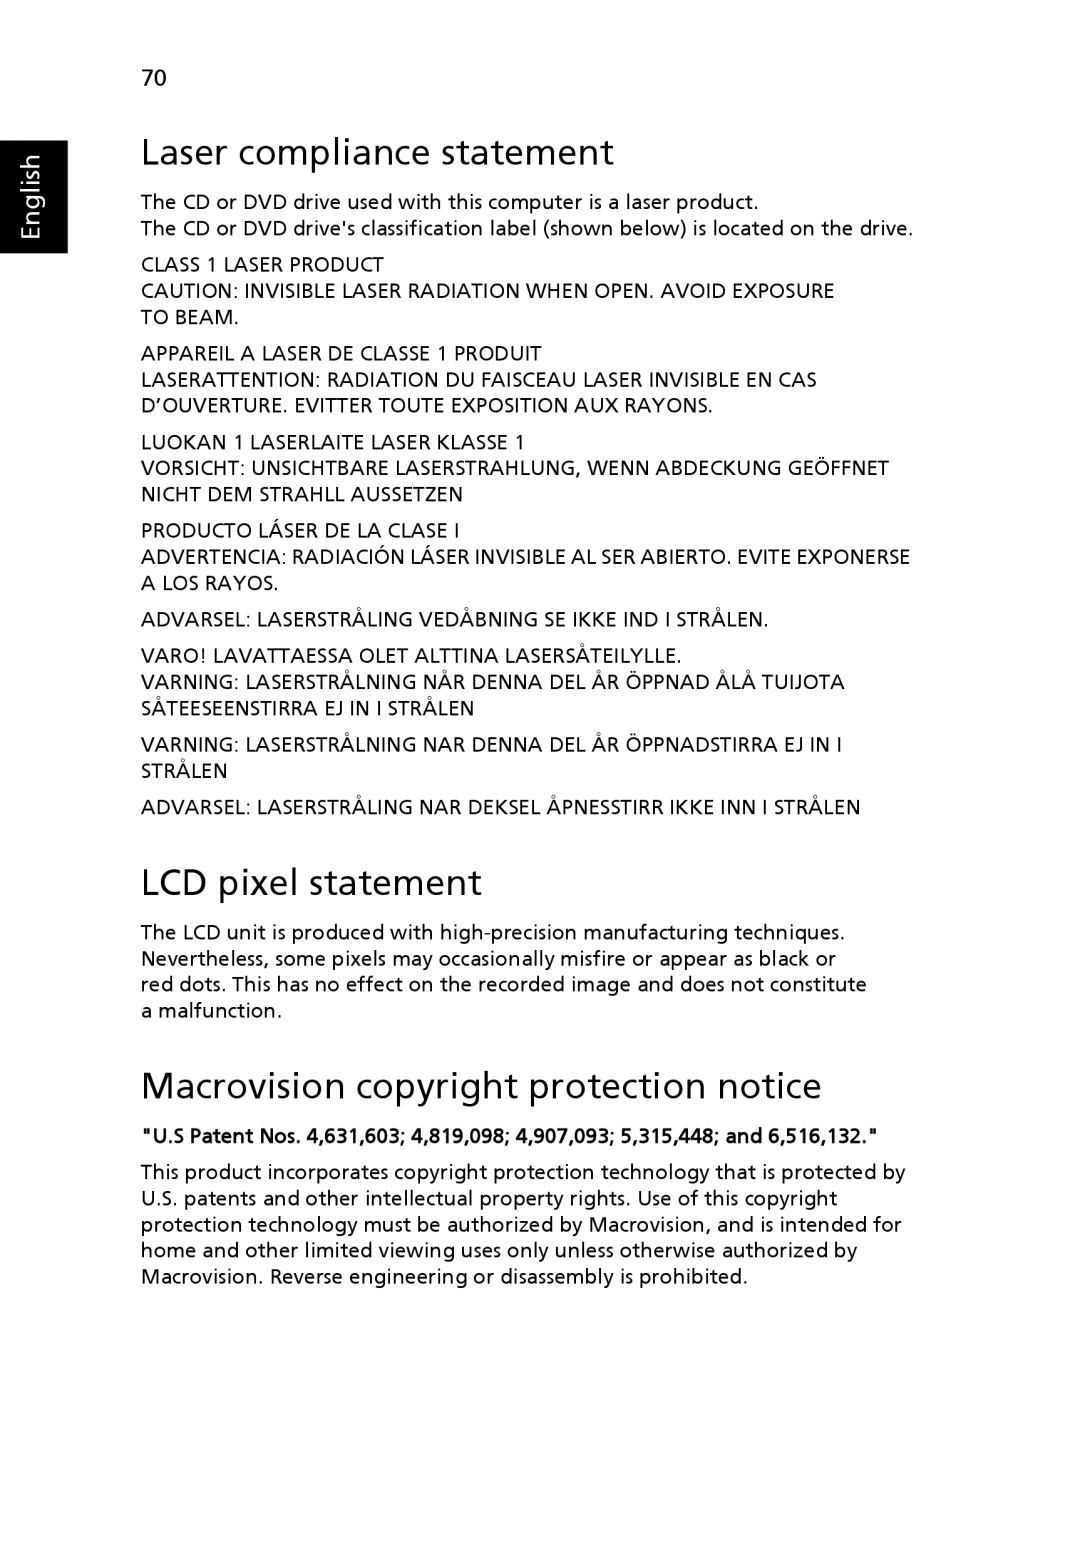 Acer 7620Z manual Laser compliance statement, LCD pixel statement, Macrovision copyright protection notice 